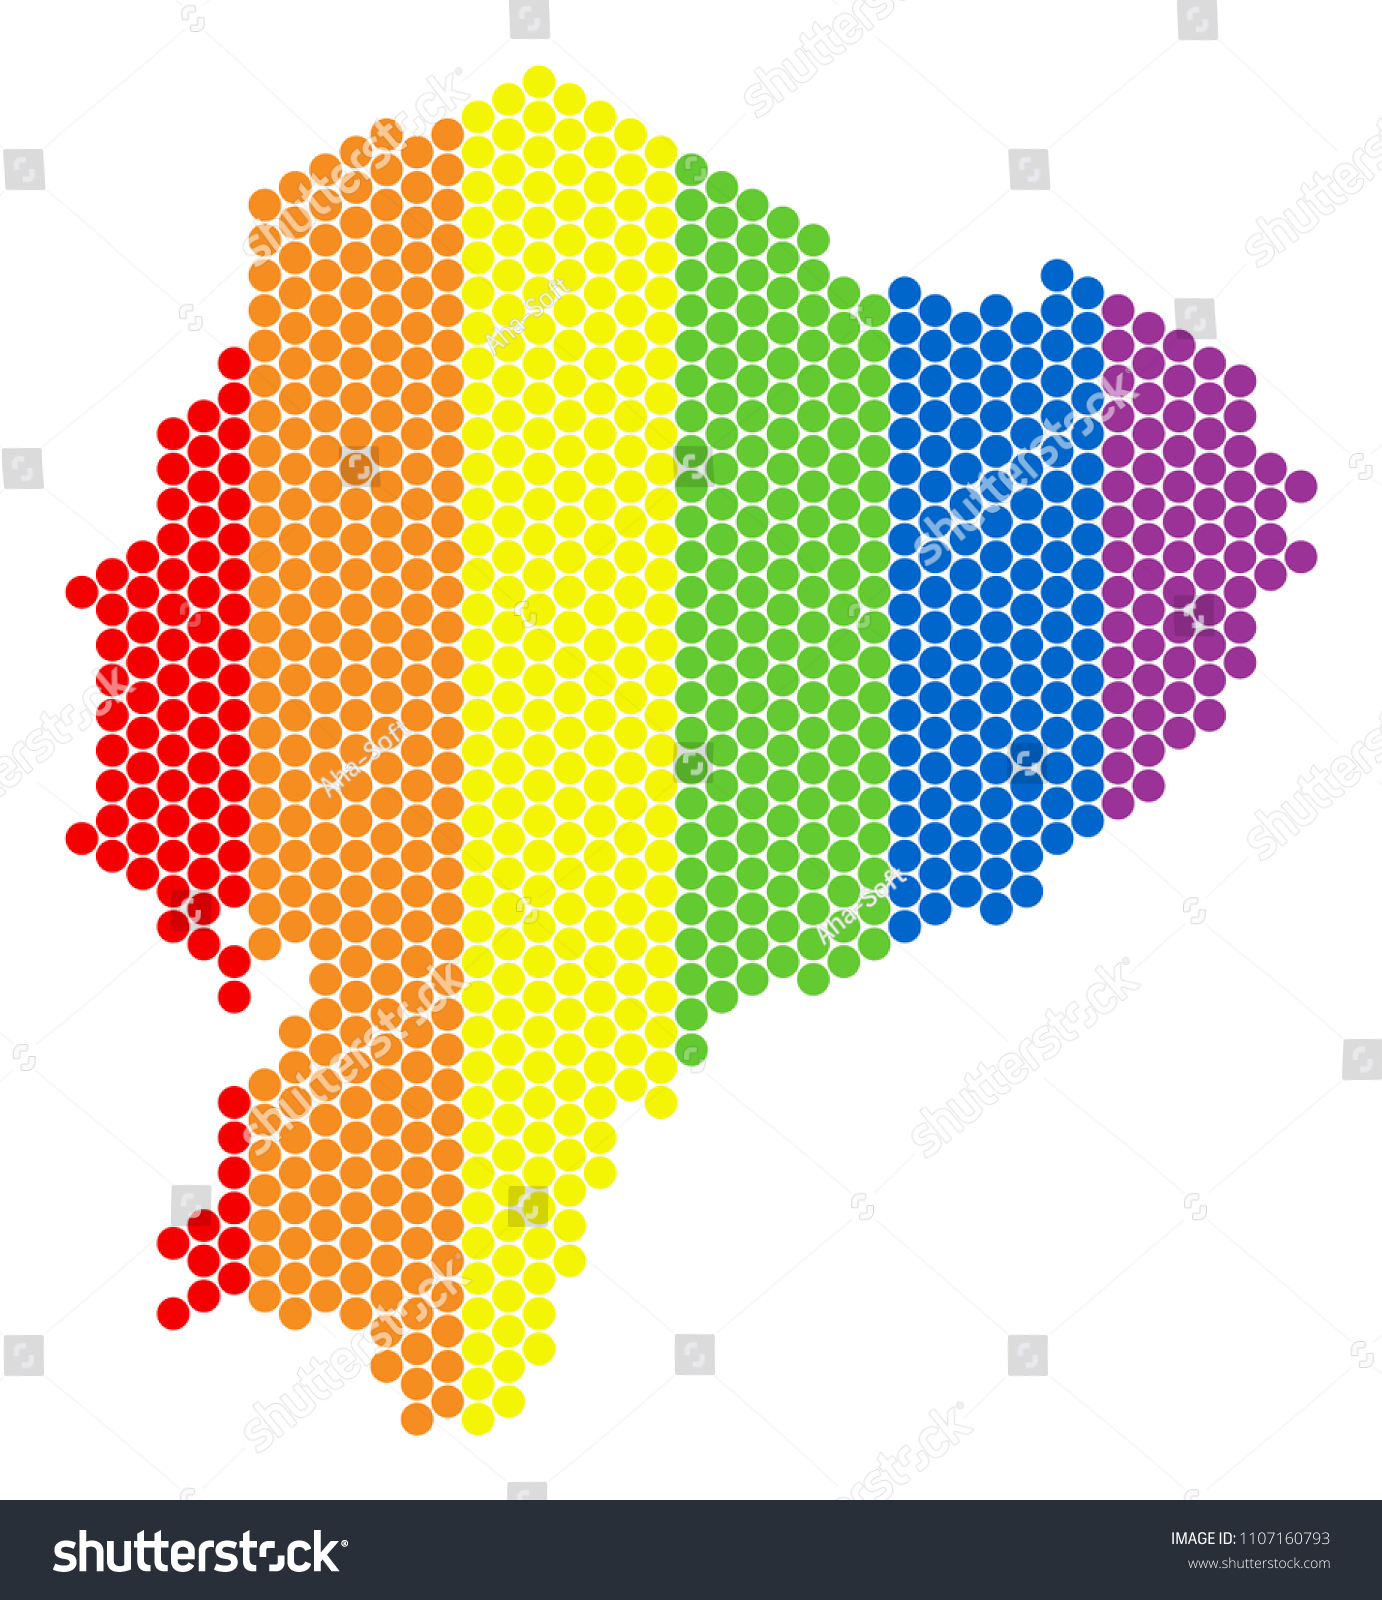 A Dotted Lgbt Ecuador Map For Lesbians Gays Royalty Free Stock Vector 1107160793 0204